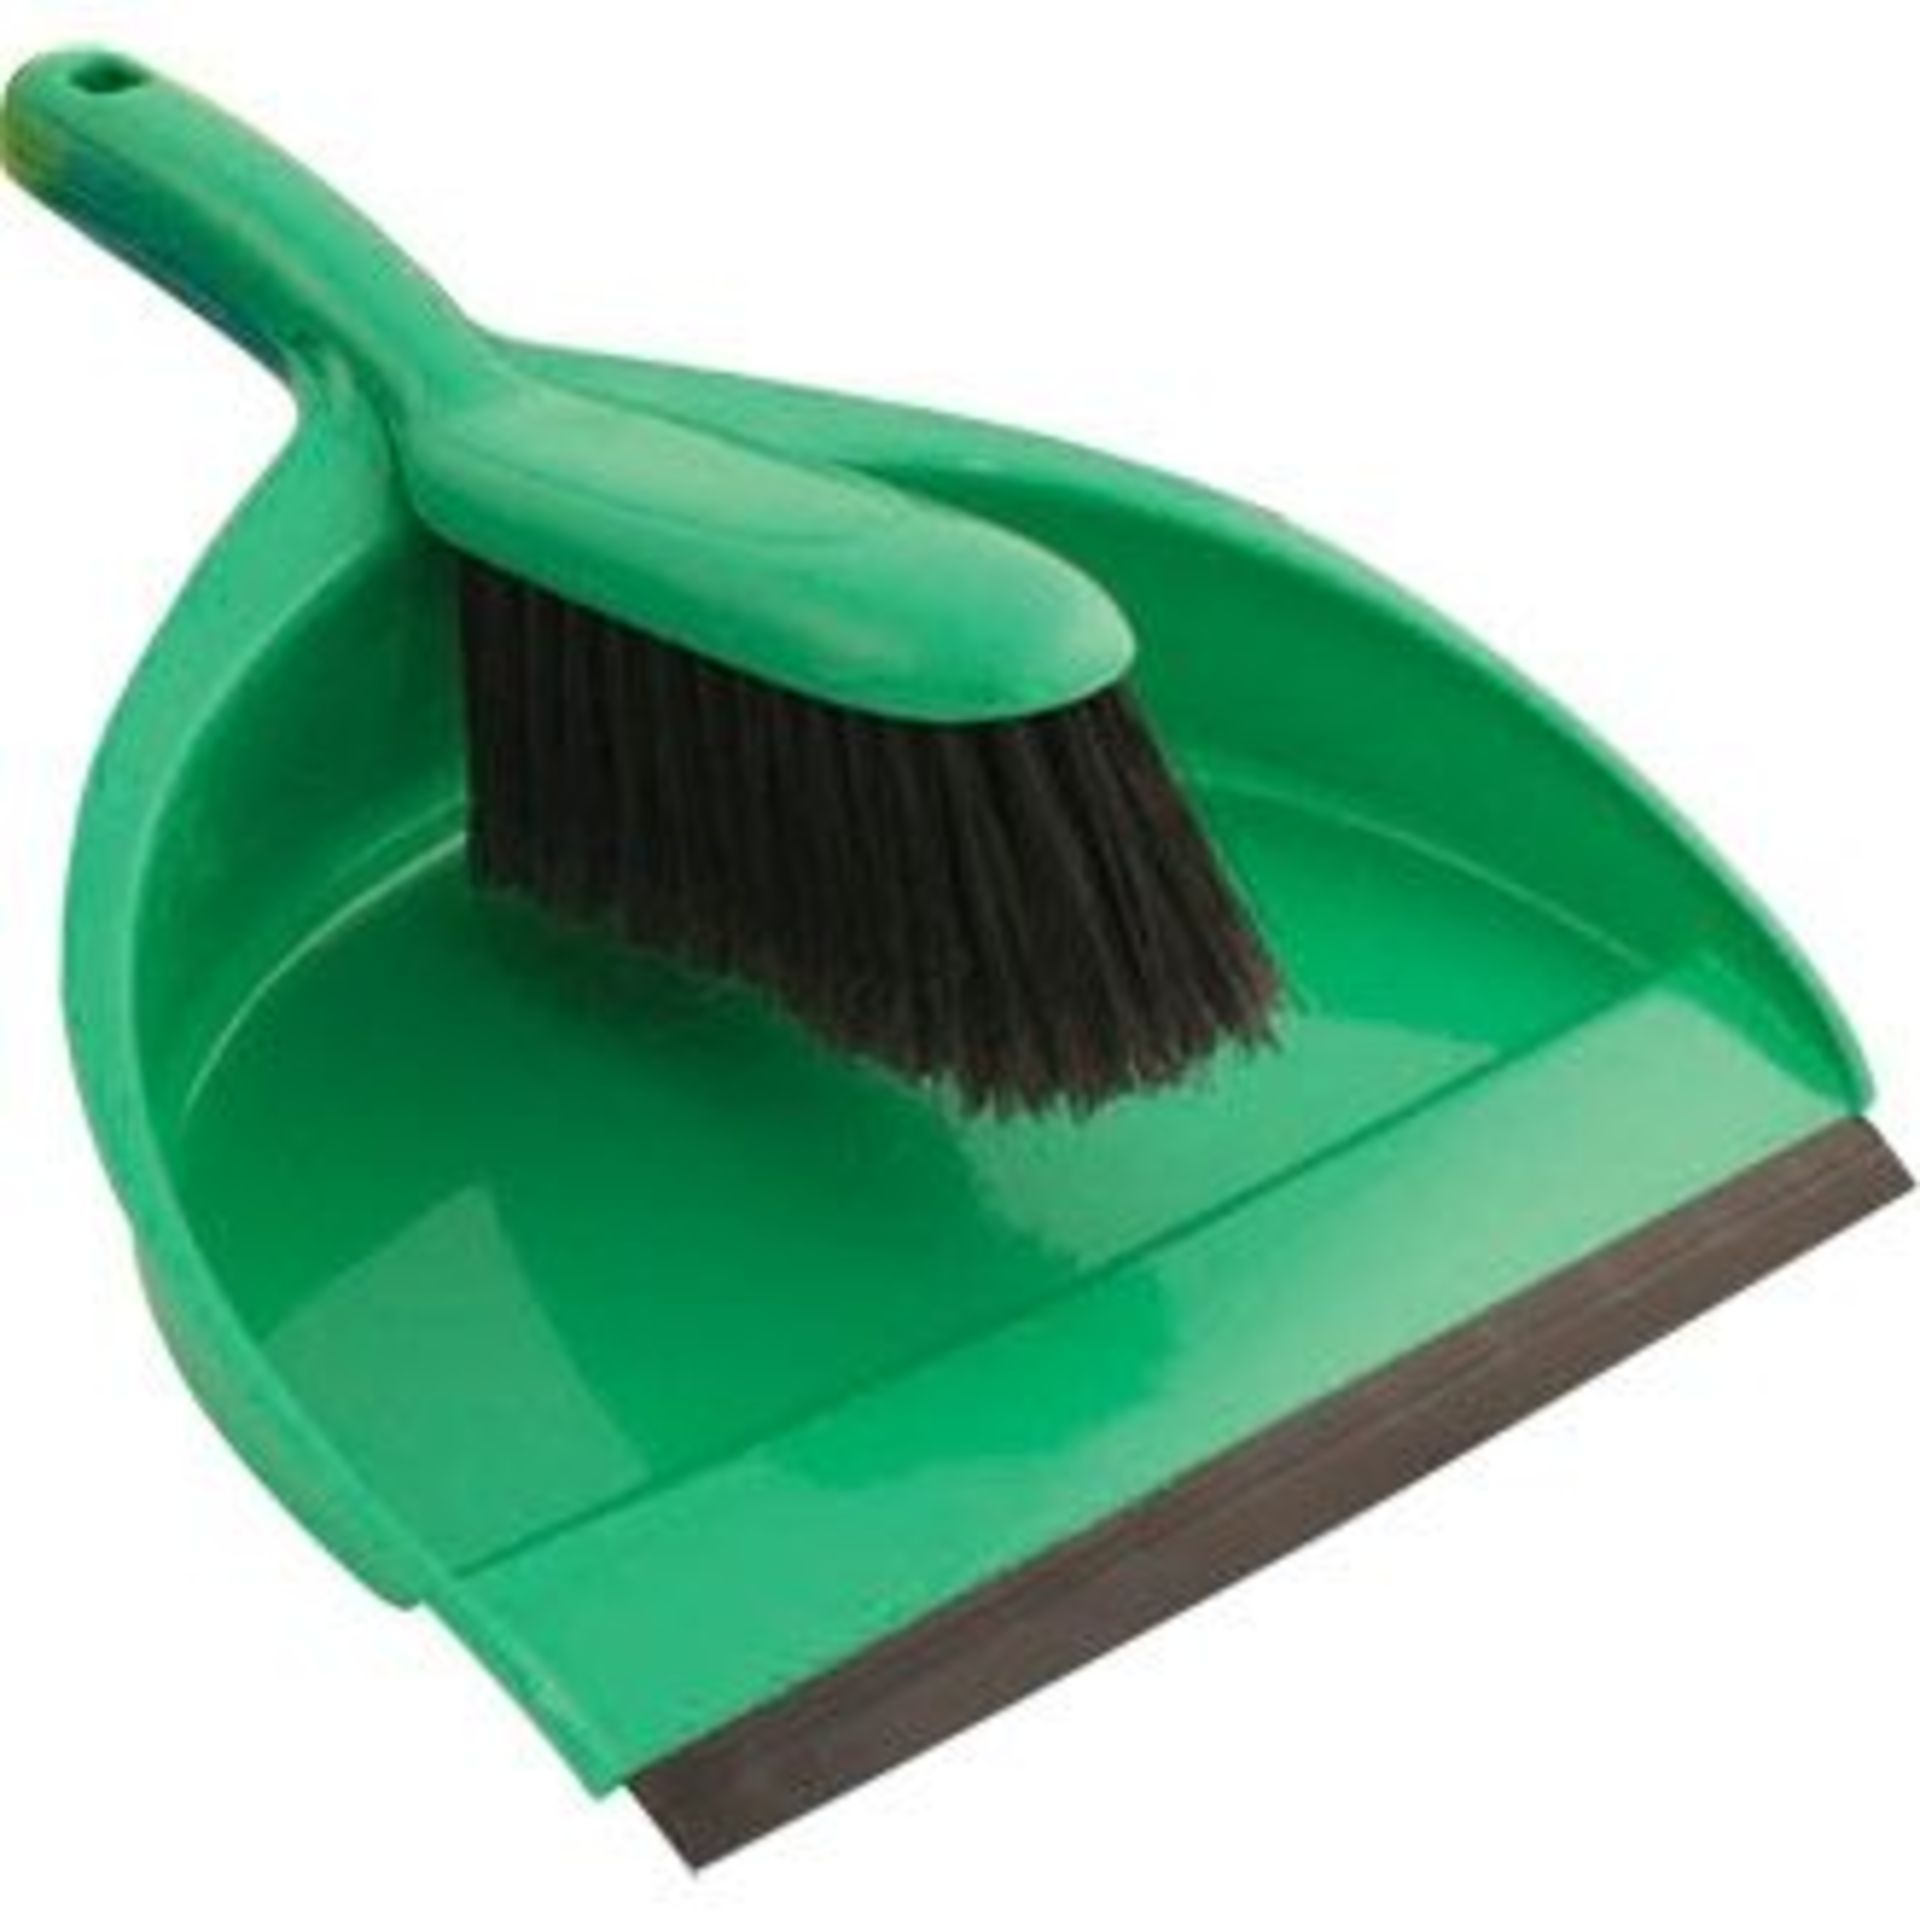 V *TRADE QTY* Brand New Six Dustpan & Brush Sets X 4 YOUR BID PRICE TO BE MULTIPLIED BY FOUR